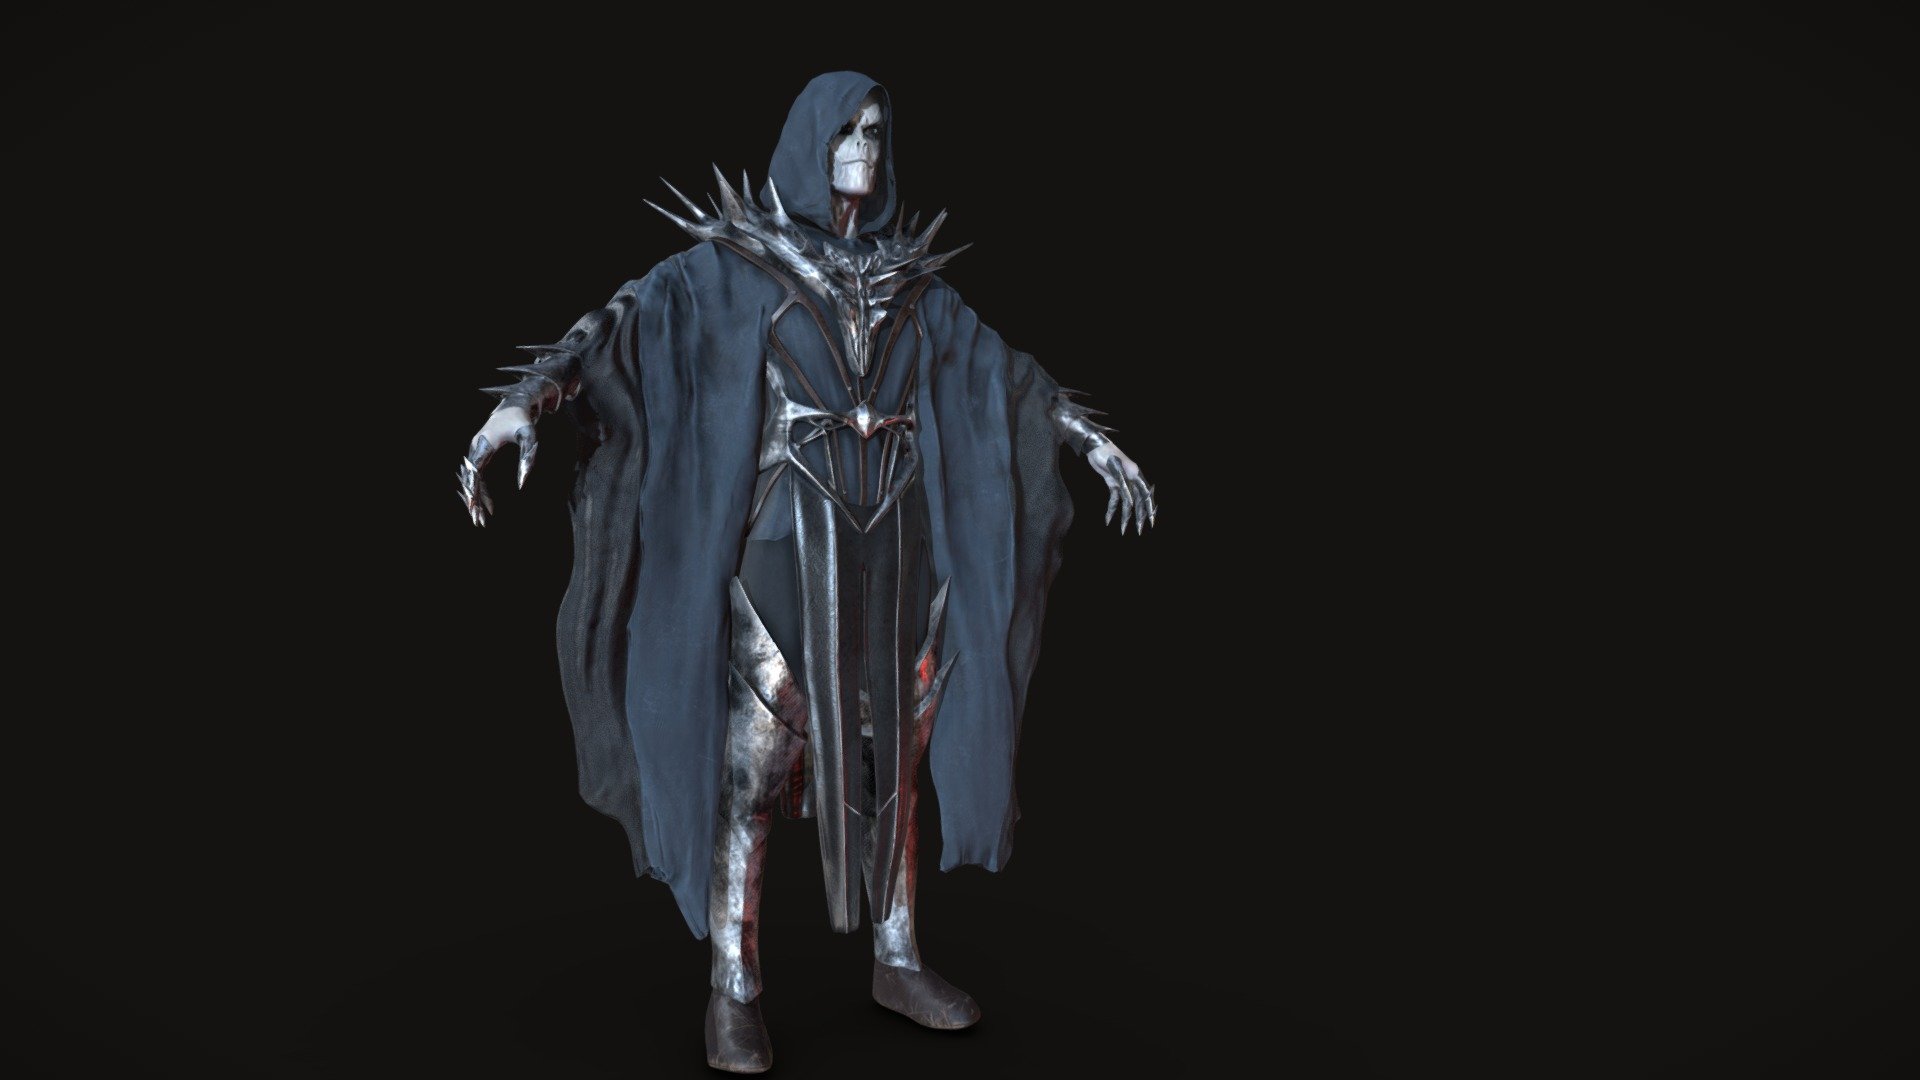 This is my final project for graduation : a Dark Sorcerer character based on a amazing concept. Created in ZBrush. Blocked out clothing &amp; armor pieces in Maya to speed up production. Retopology/UV in Maya. 

Week I - Initial sculpt Zbrush

Week II - Update sculpt based on feedback, retopology,UV, Bake (intially baked at 4k but caused issues with site reloading - lowered to 2k)

Week III - Texturing Substance Painter

Week IV - Polish - Dark Sorcerer (WIP) - 3D model by Tonya (@TonyaW) 3d model